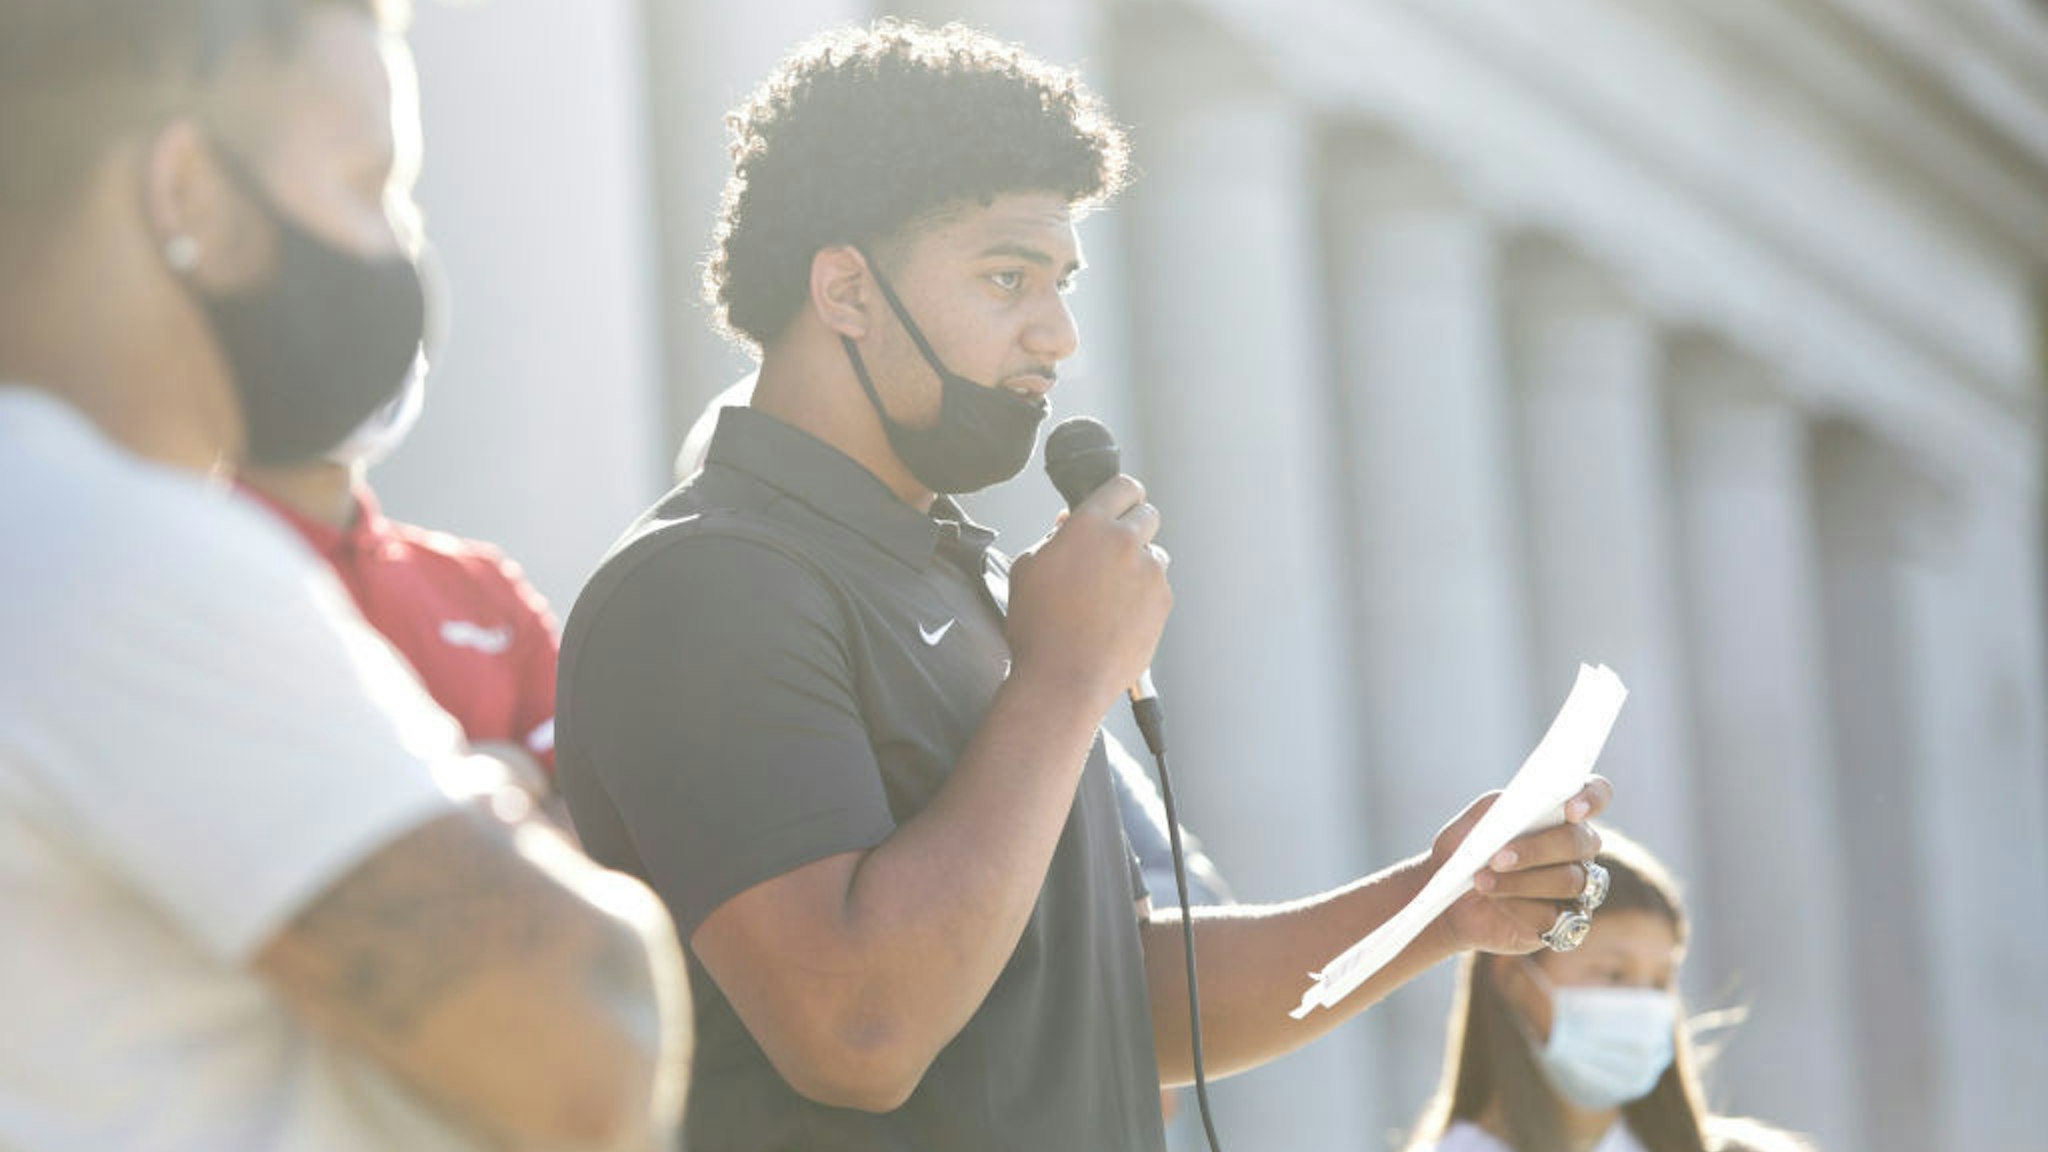 Eastside Catholic High School football player J.T. Tuimoloau, one of the top recruits in the US, speaks during a rally at the state capitol organized by Student Athletes of Washington (SAW), a group that formed to protest the postponement of fall sports due to COVID-19, in Olympia, Washington on September 3, 2020. (Photo by Jason Redmond / AFP) (Photo by JASON REDMOND/AFP via Getty Images)